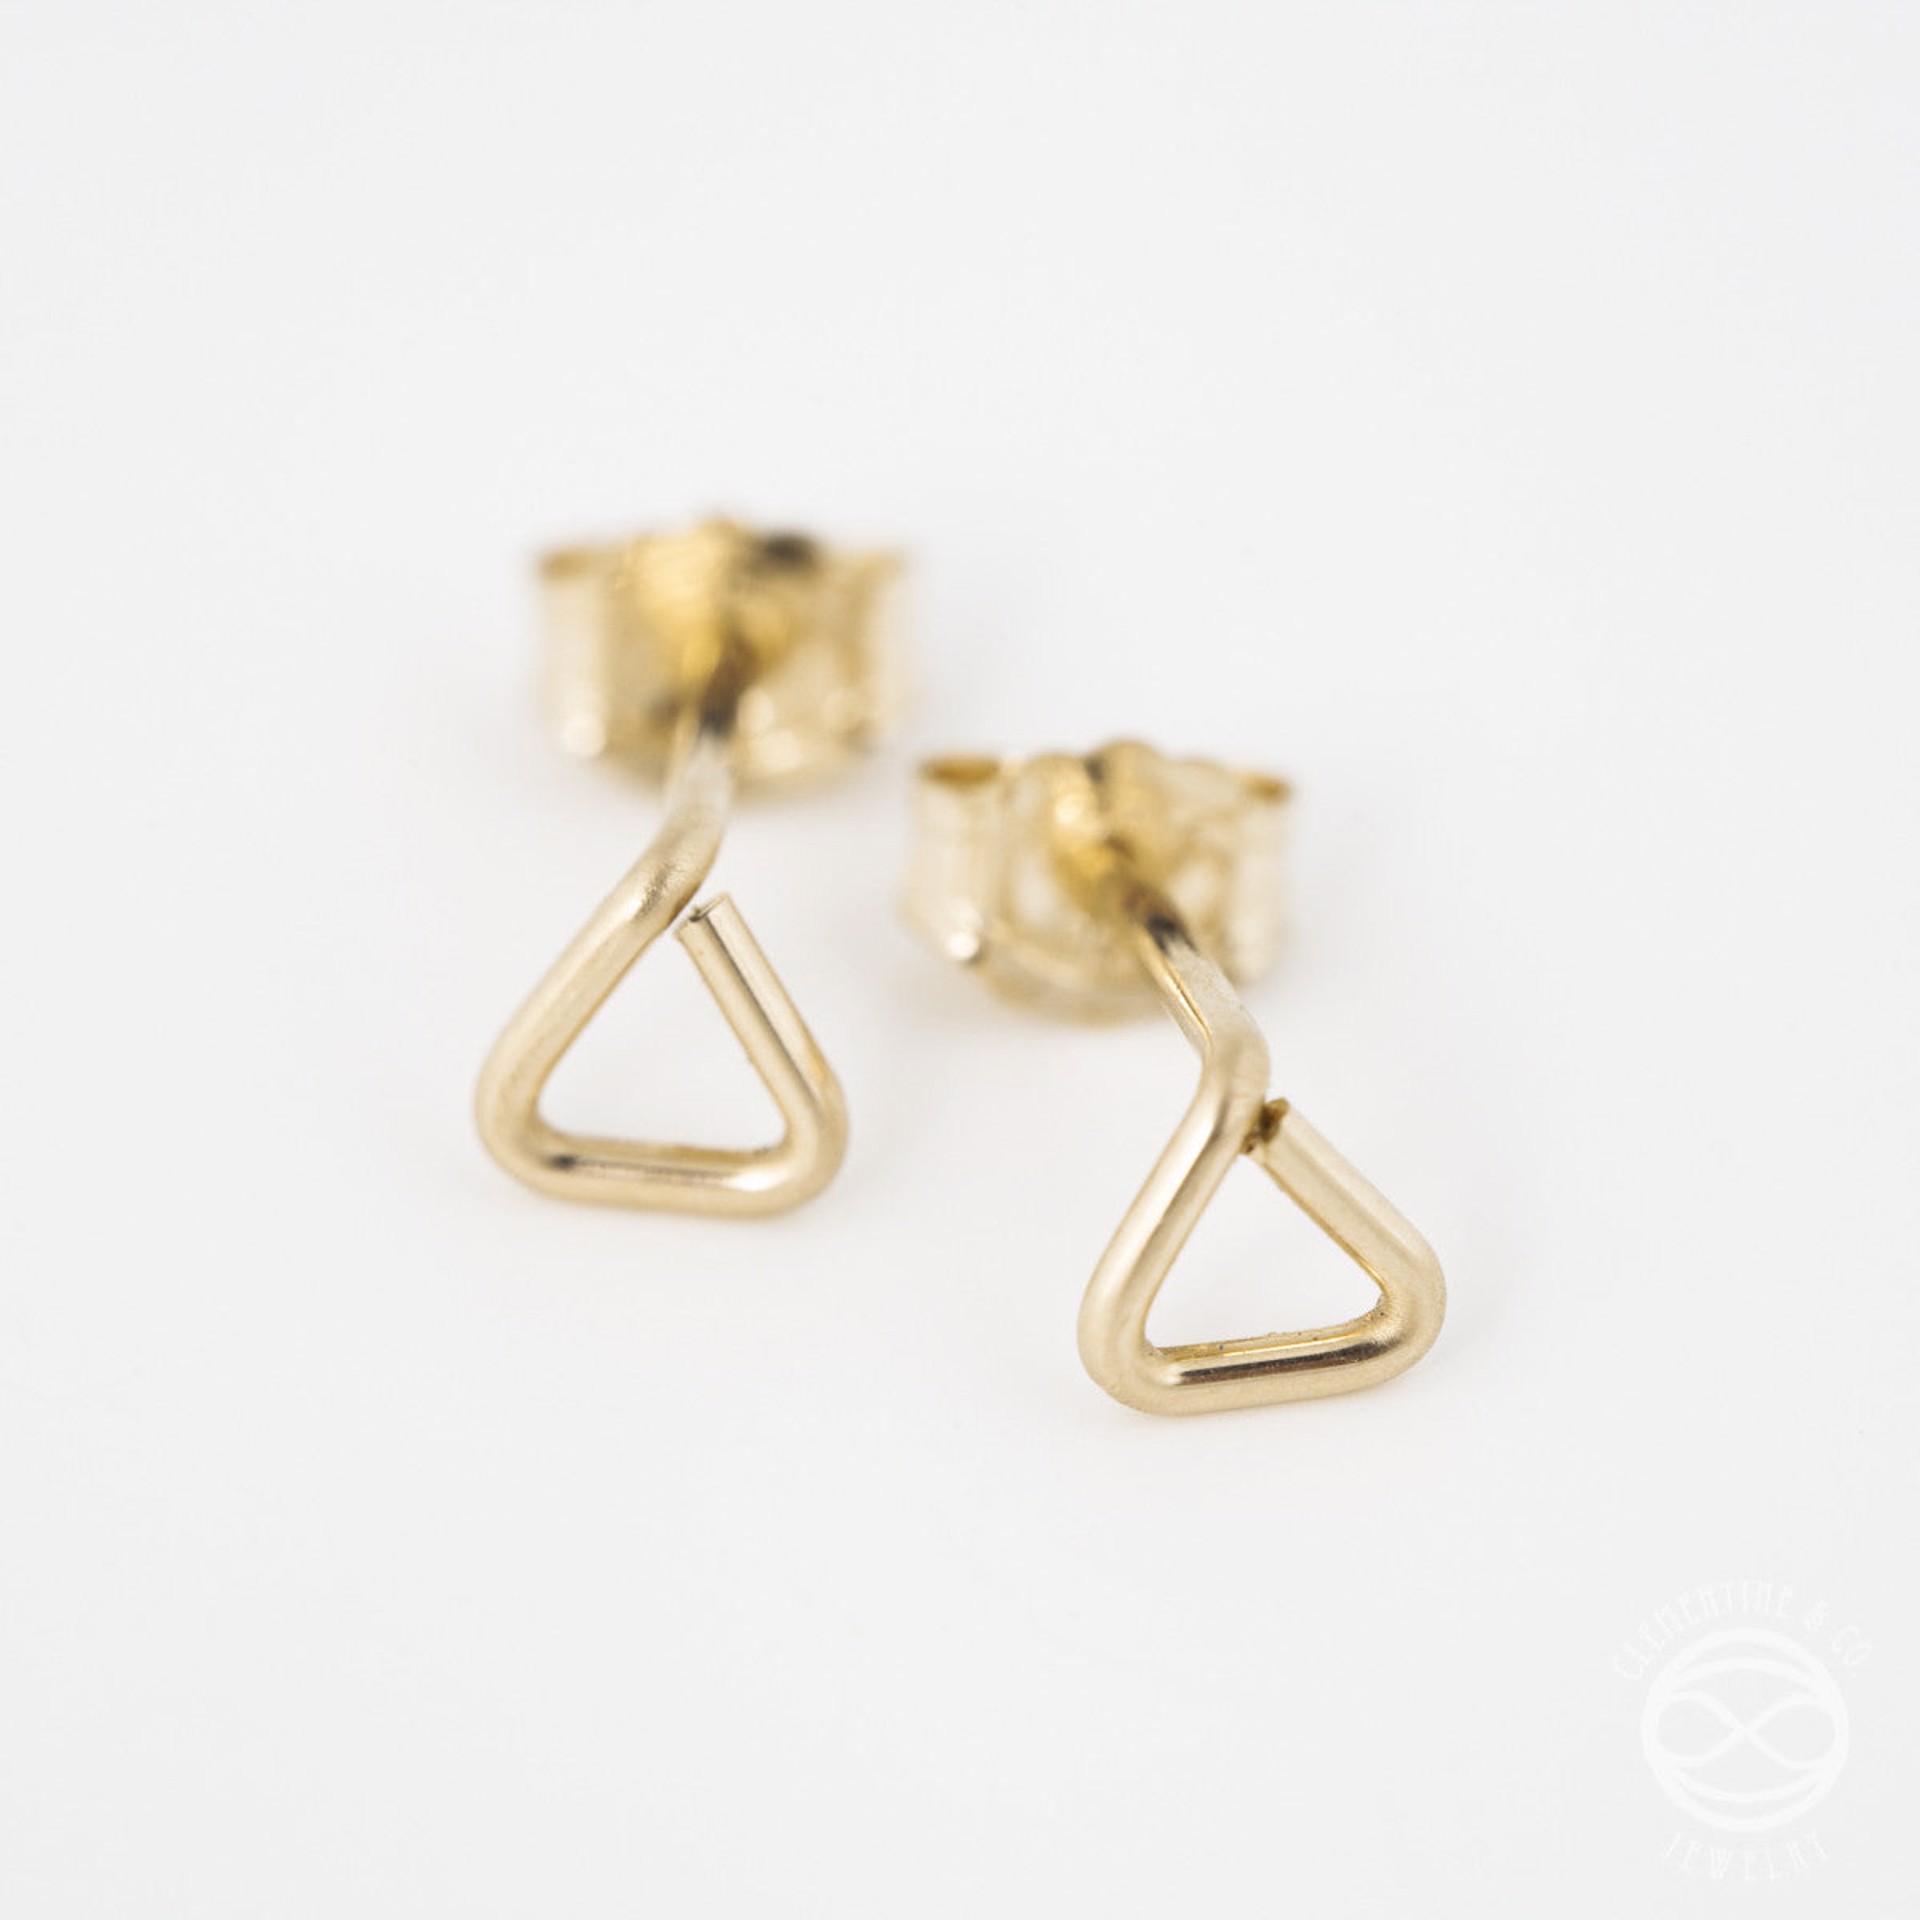 Shape Studs in Gold - Infinity by Clementine & Co. Jewelry